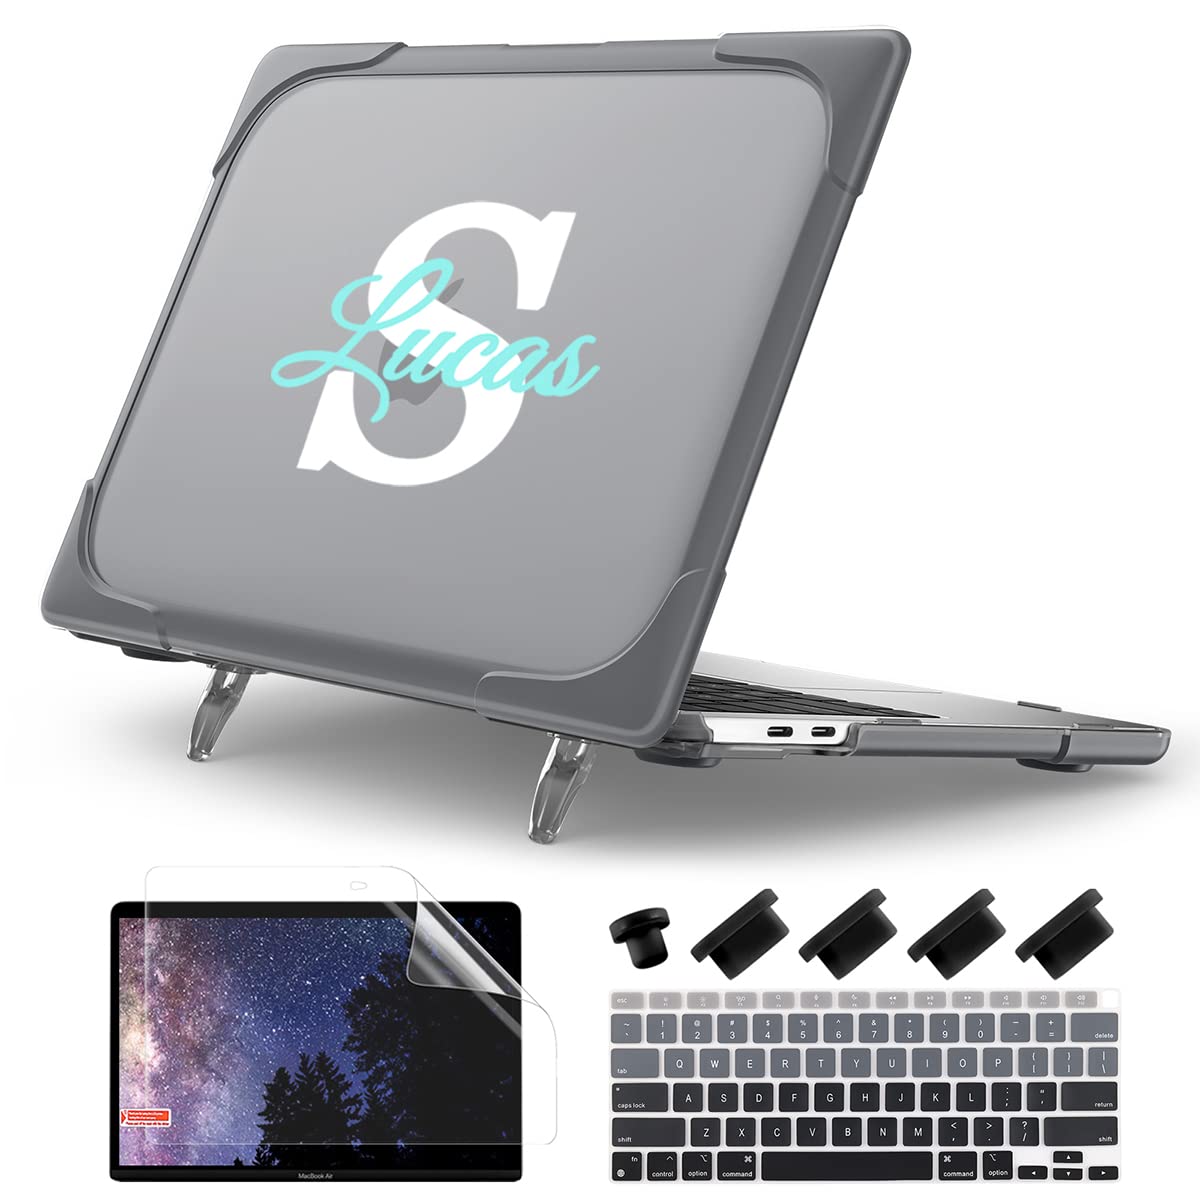 Invest in a high-quality protective case to shield your laptop screen from potential damage.
Choose a case that provides reliable protection against bumps, scratches, and impacts.